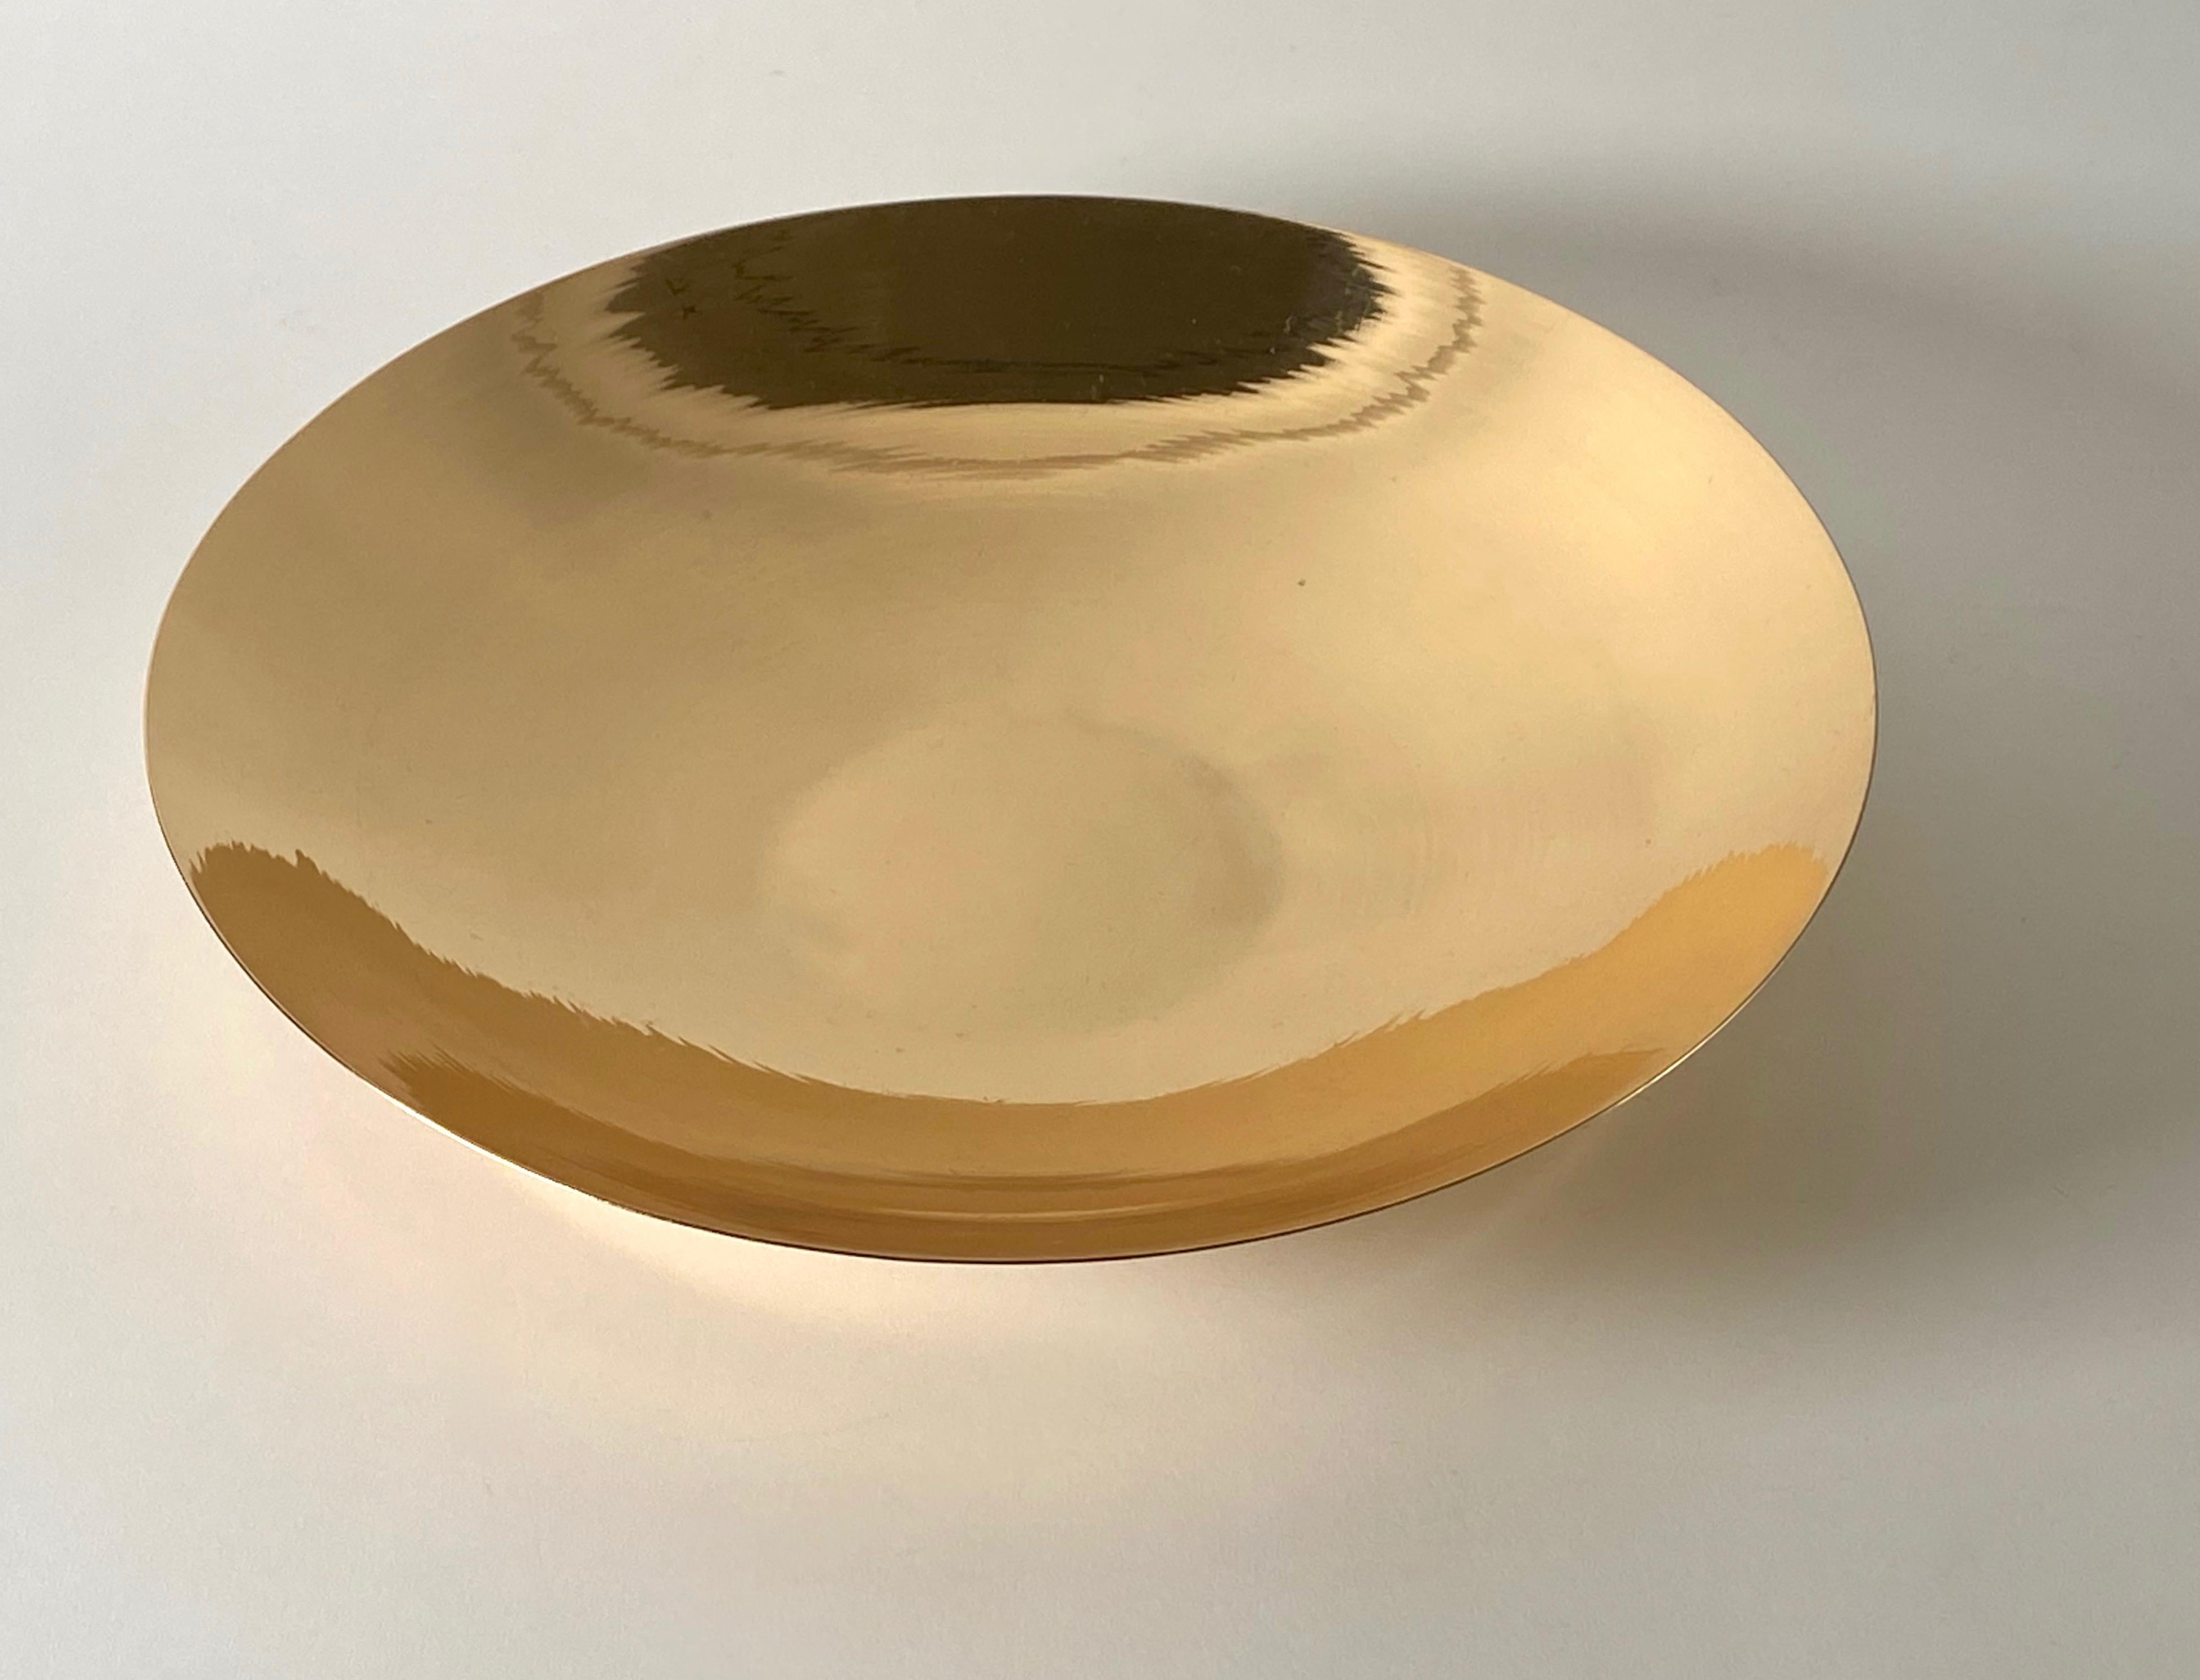 Turned rare bronze bowl by noted metalsmith, designer, sculptor, jeweler, industrial designer Ronald Hayes Pearson (1924-1996) This bowl has been restored to its original intent, polished by a metalsmith and lacquered to keep its sheen. A truly